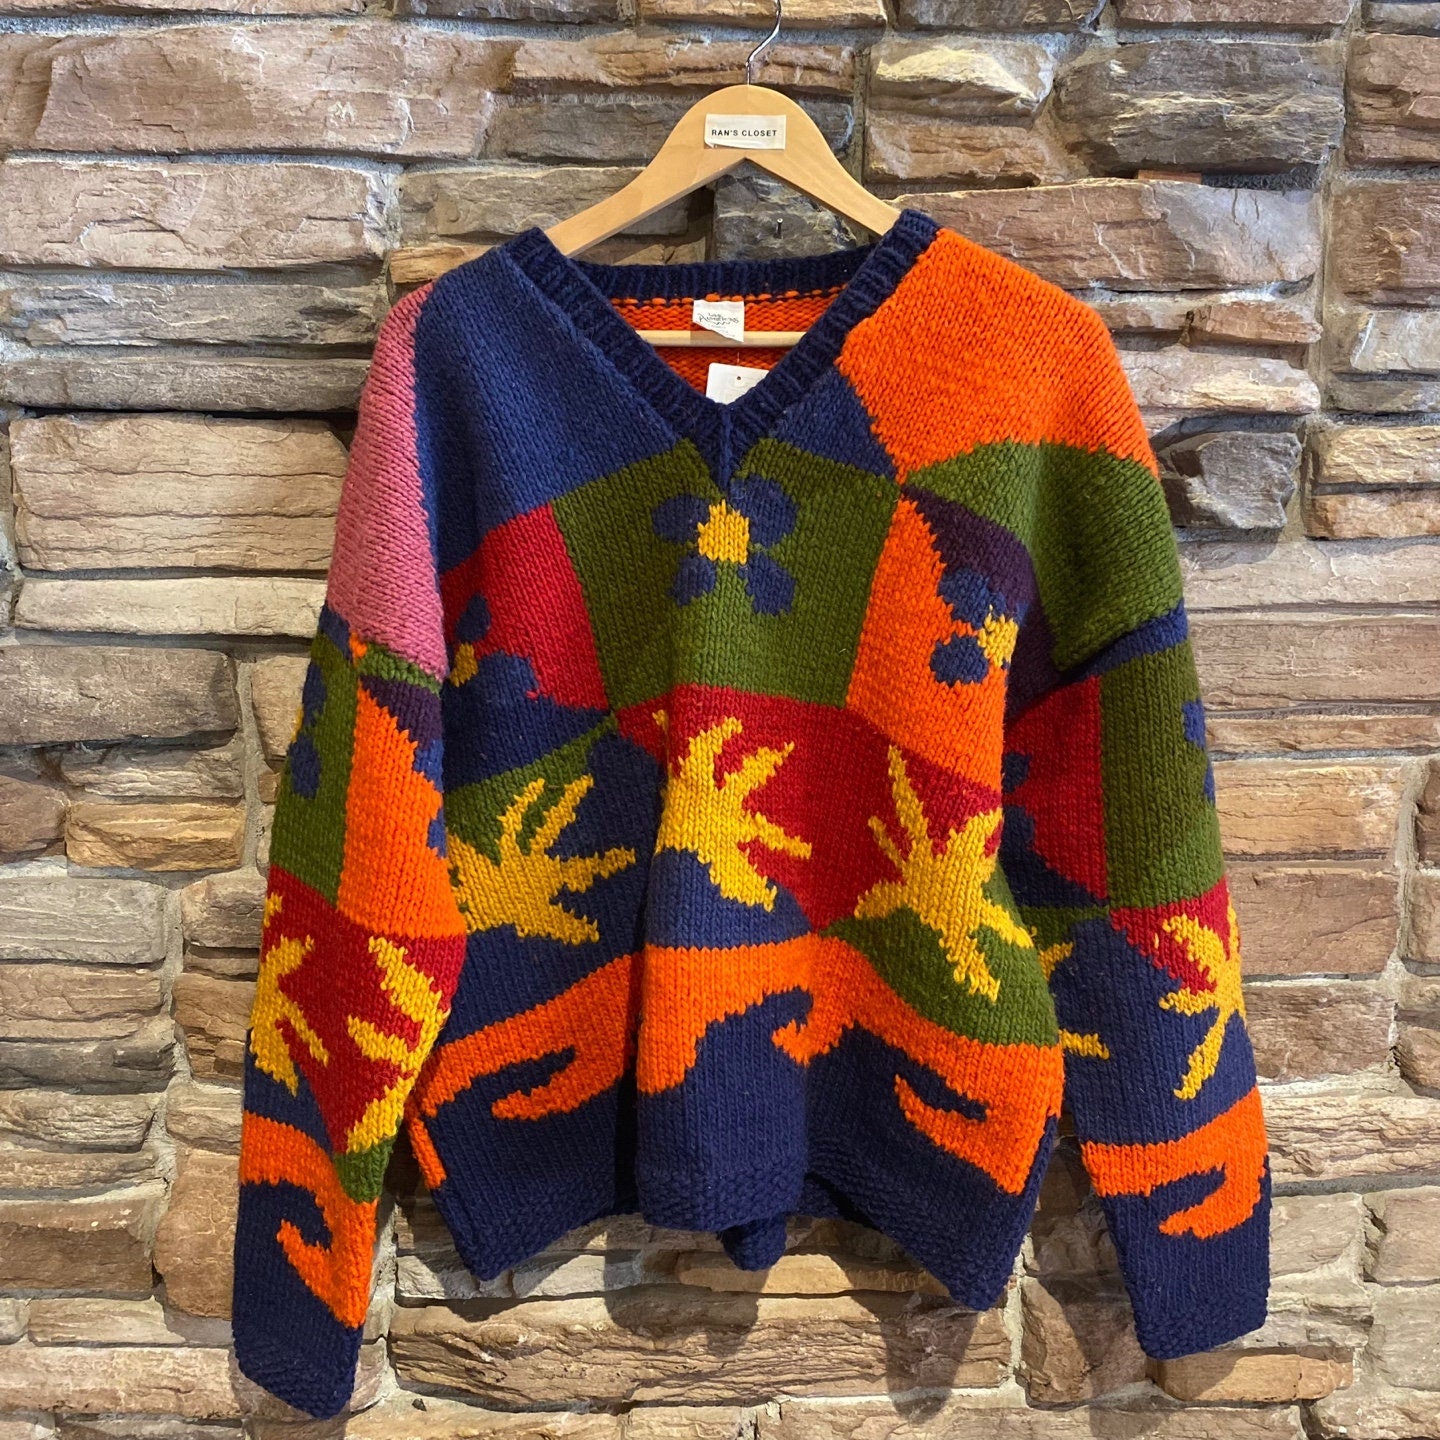 Vintage Las Americas Wool Colourful Sweater with Florals and Sun Motifs | Vintage Sweater | Knit Sweater | Wool Sweater | SKU STQ-3251 |